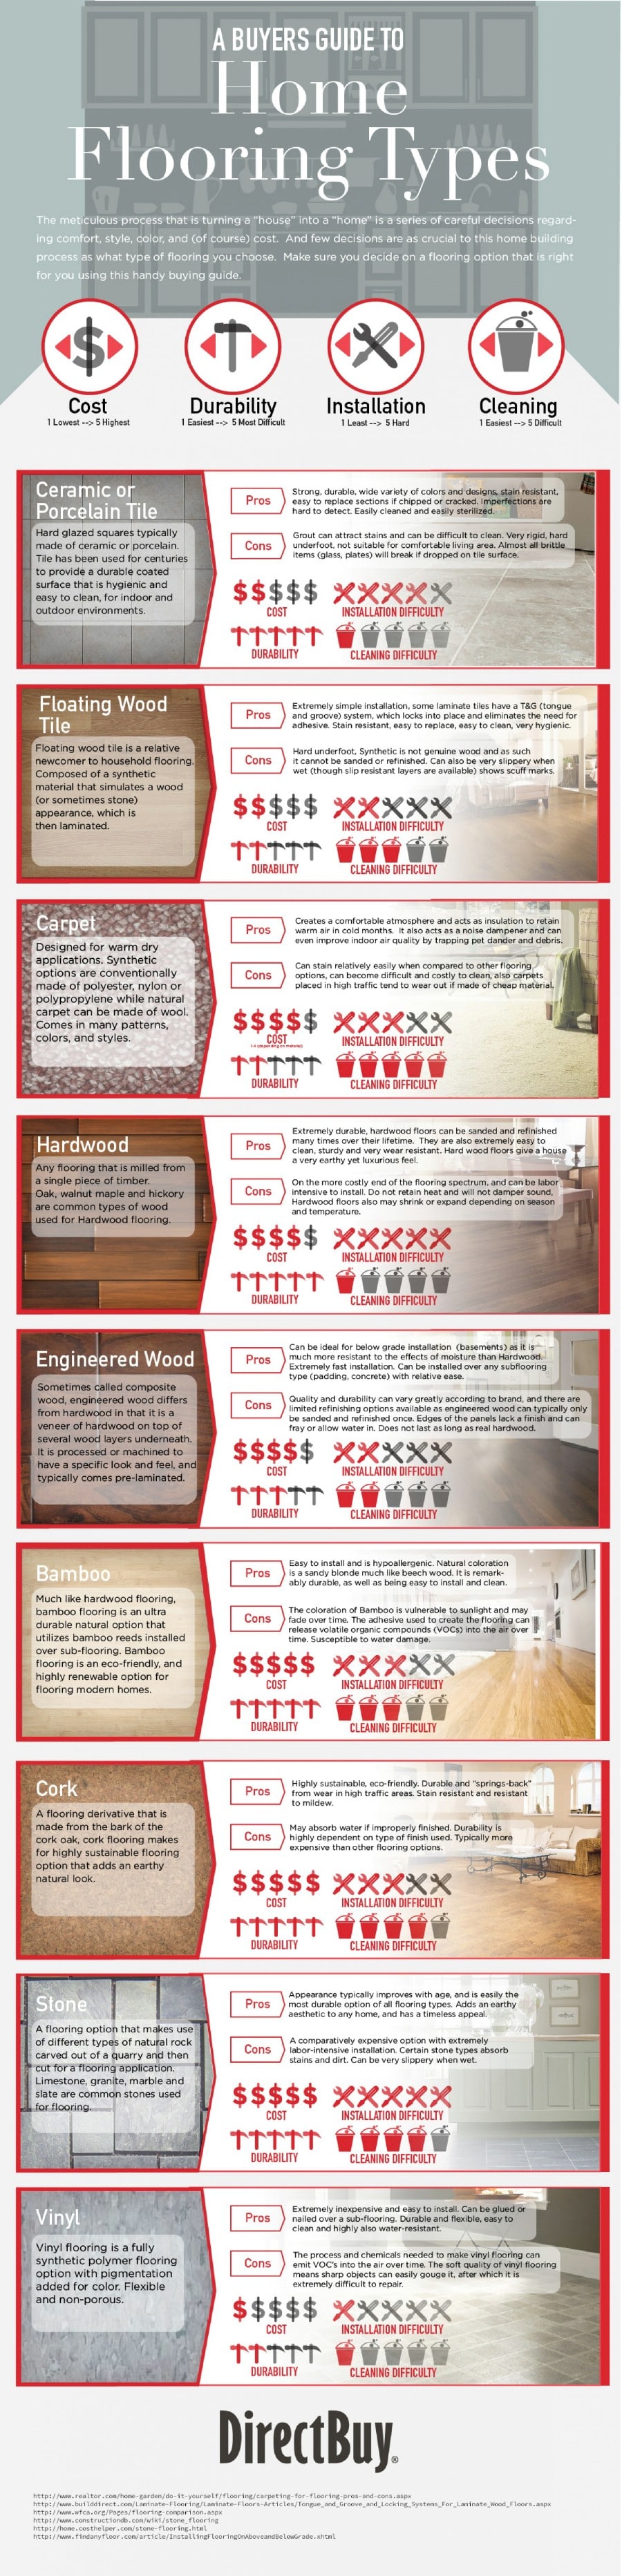 21. What type of flooring is best for your home? - 50 Amazingly Clever Cheat Sheets To Simplify Home Decorating Projects